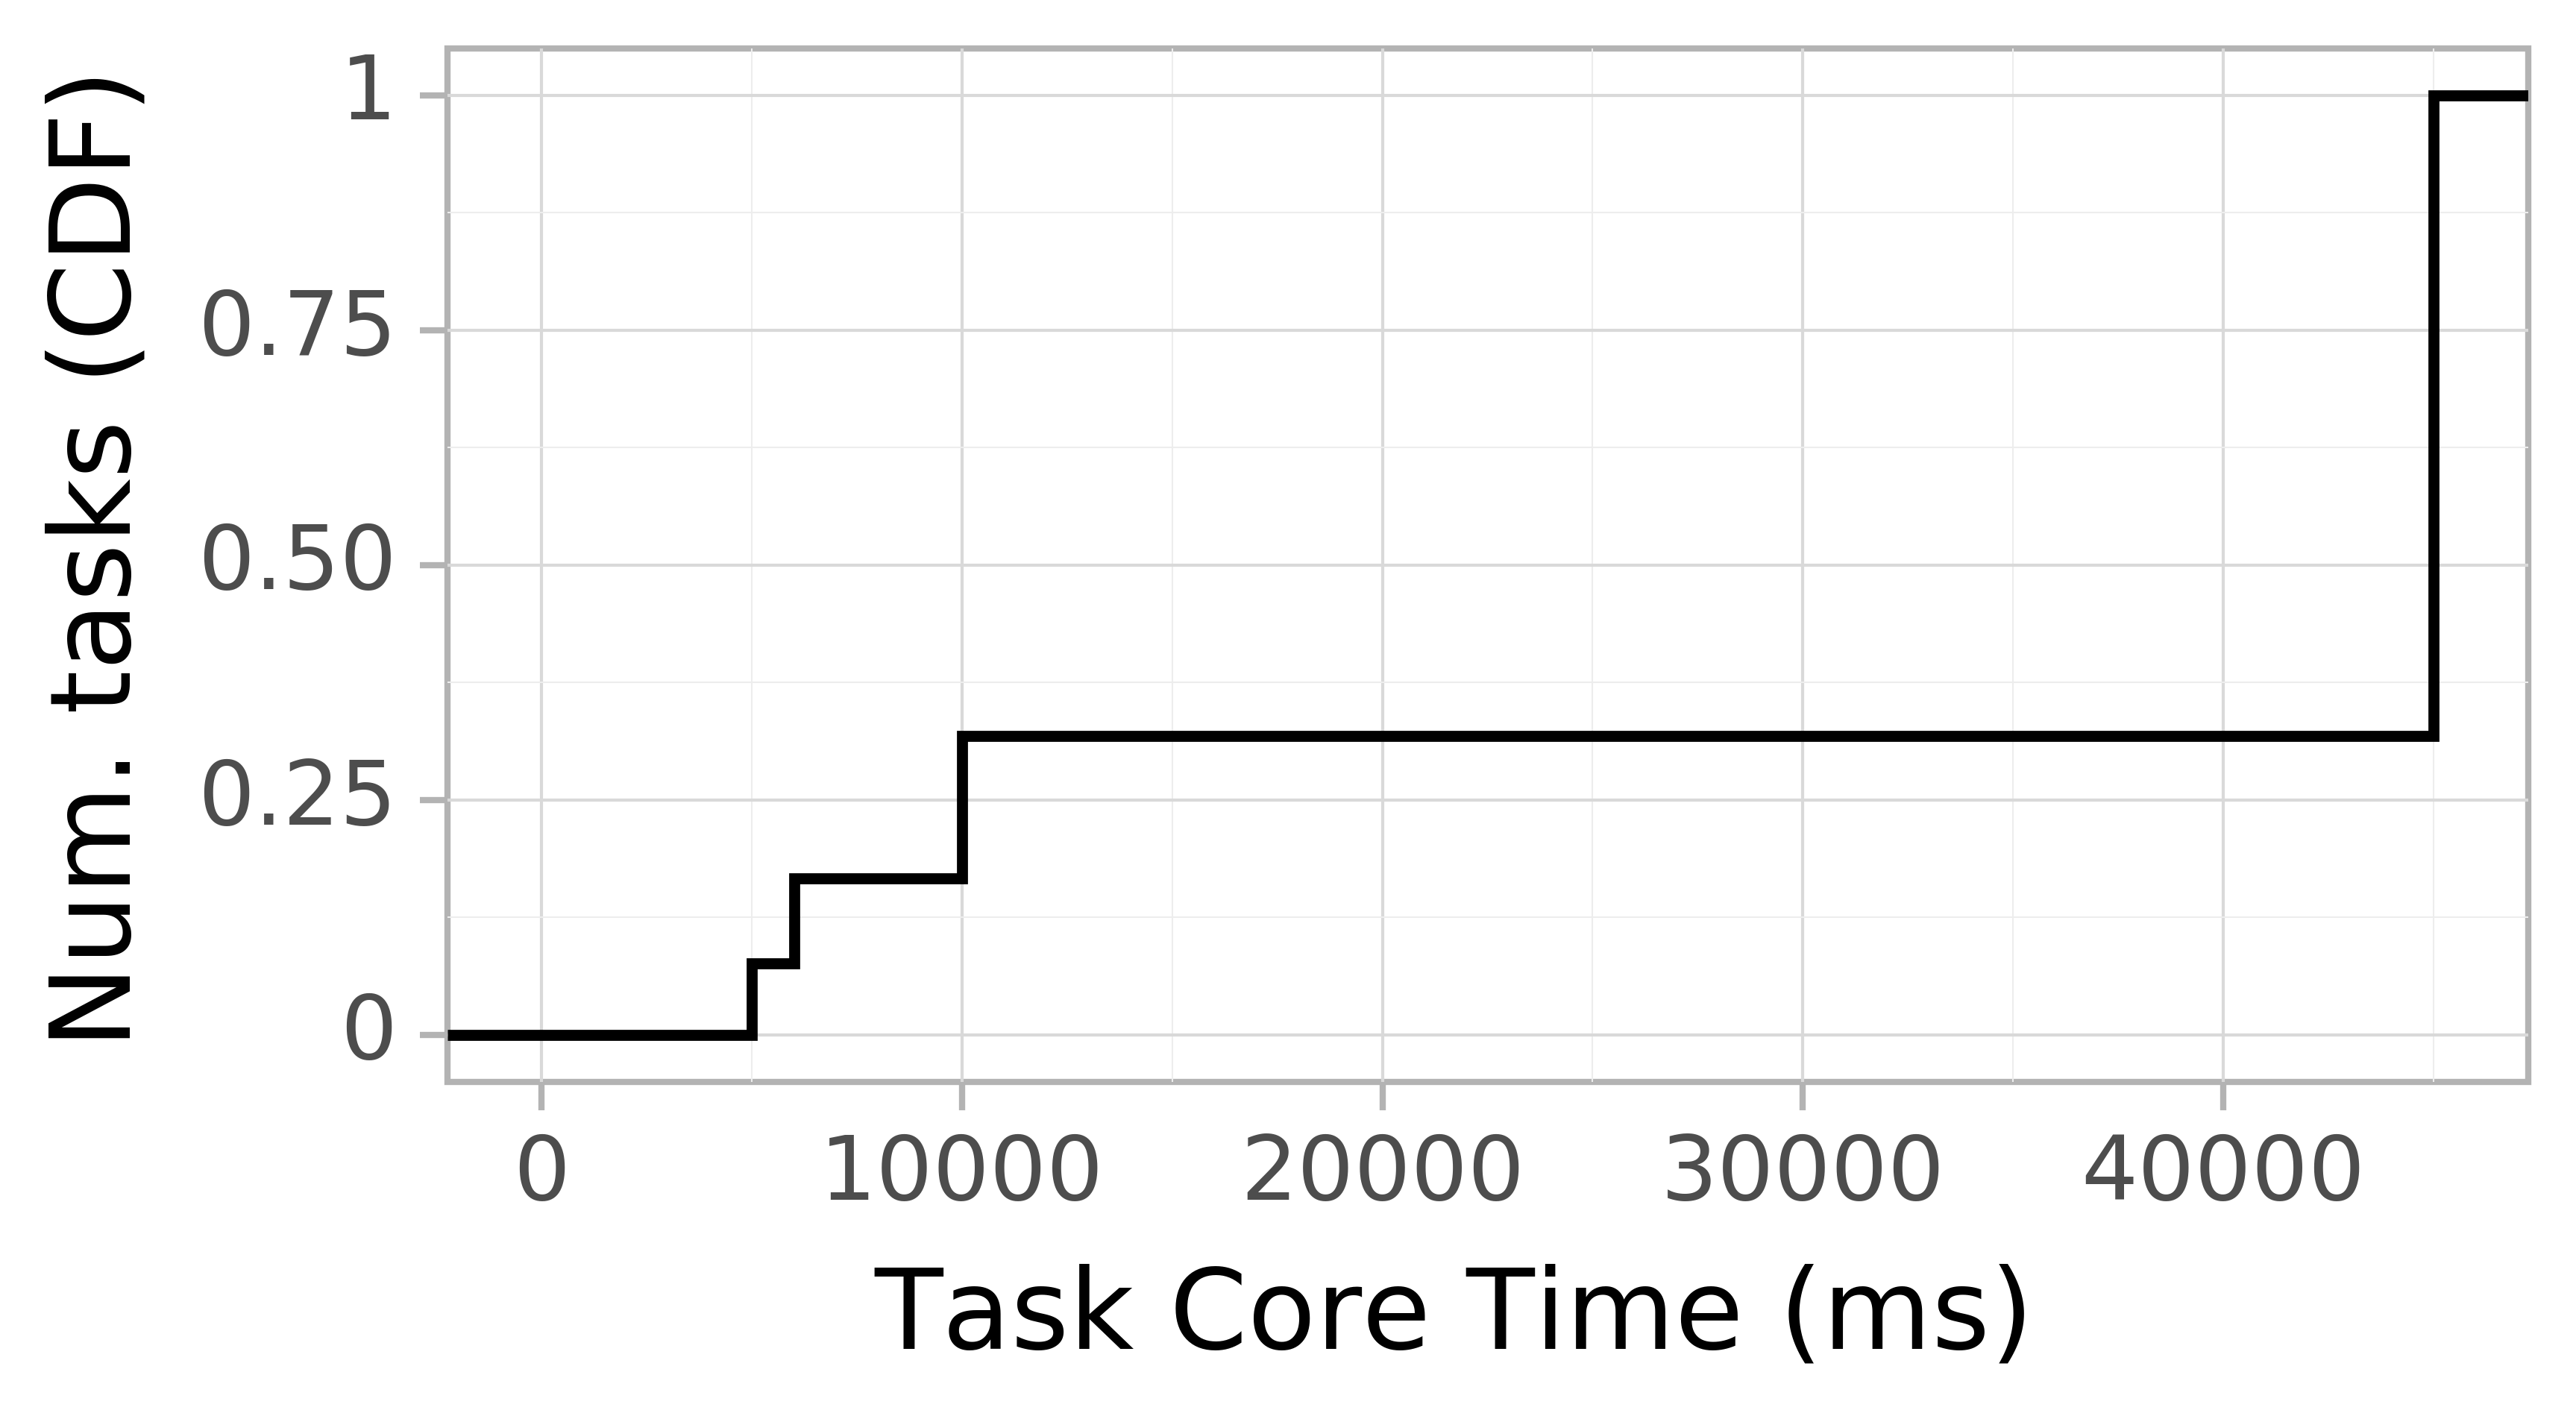 task resource time CDF graph for the Pegasus_P8 trace.